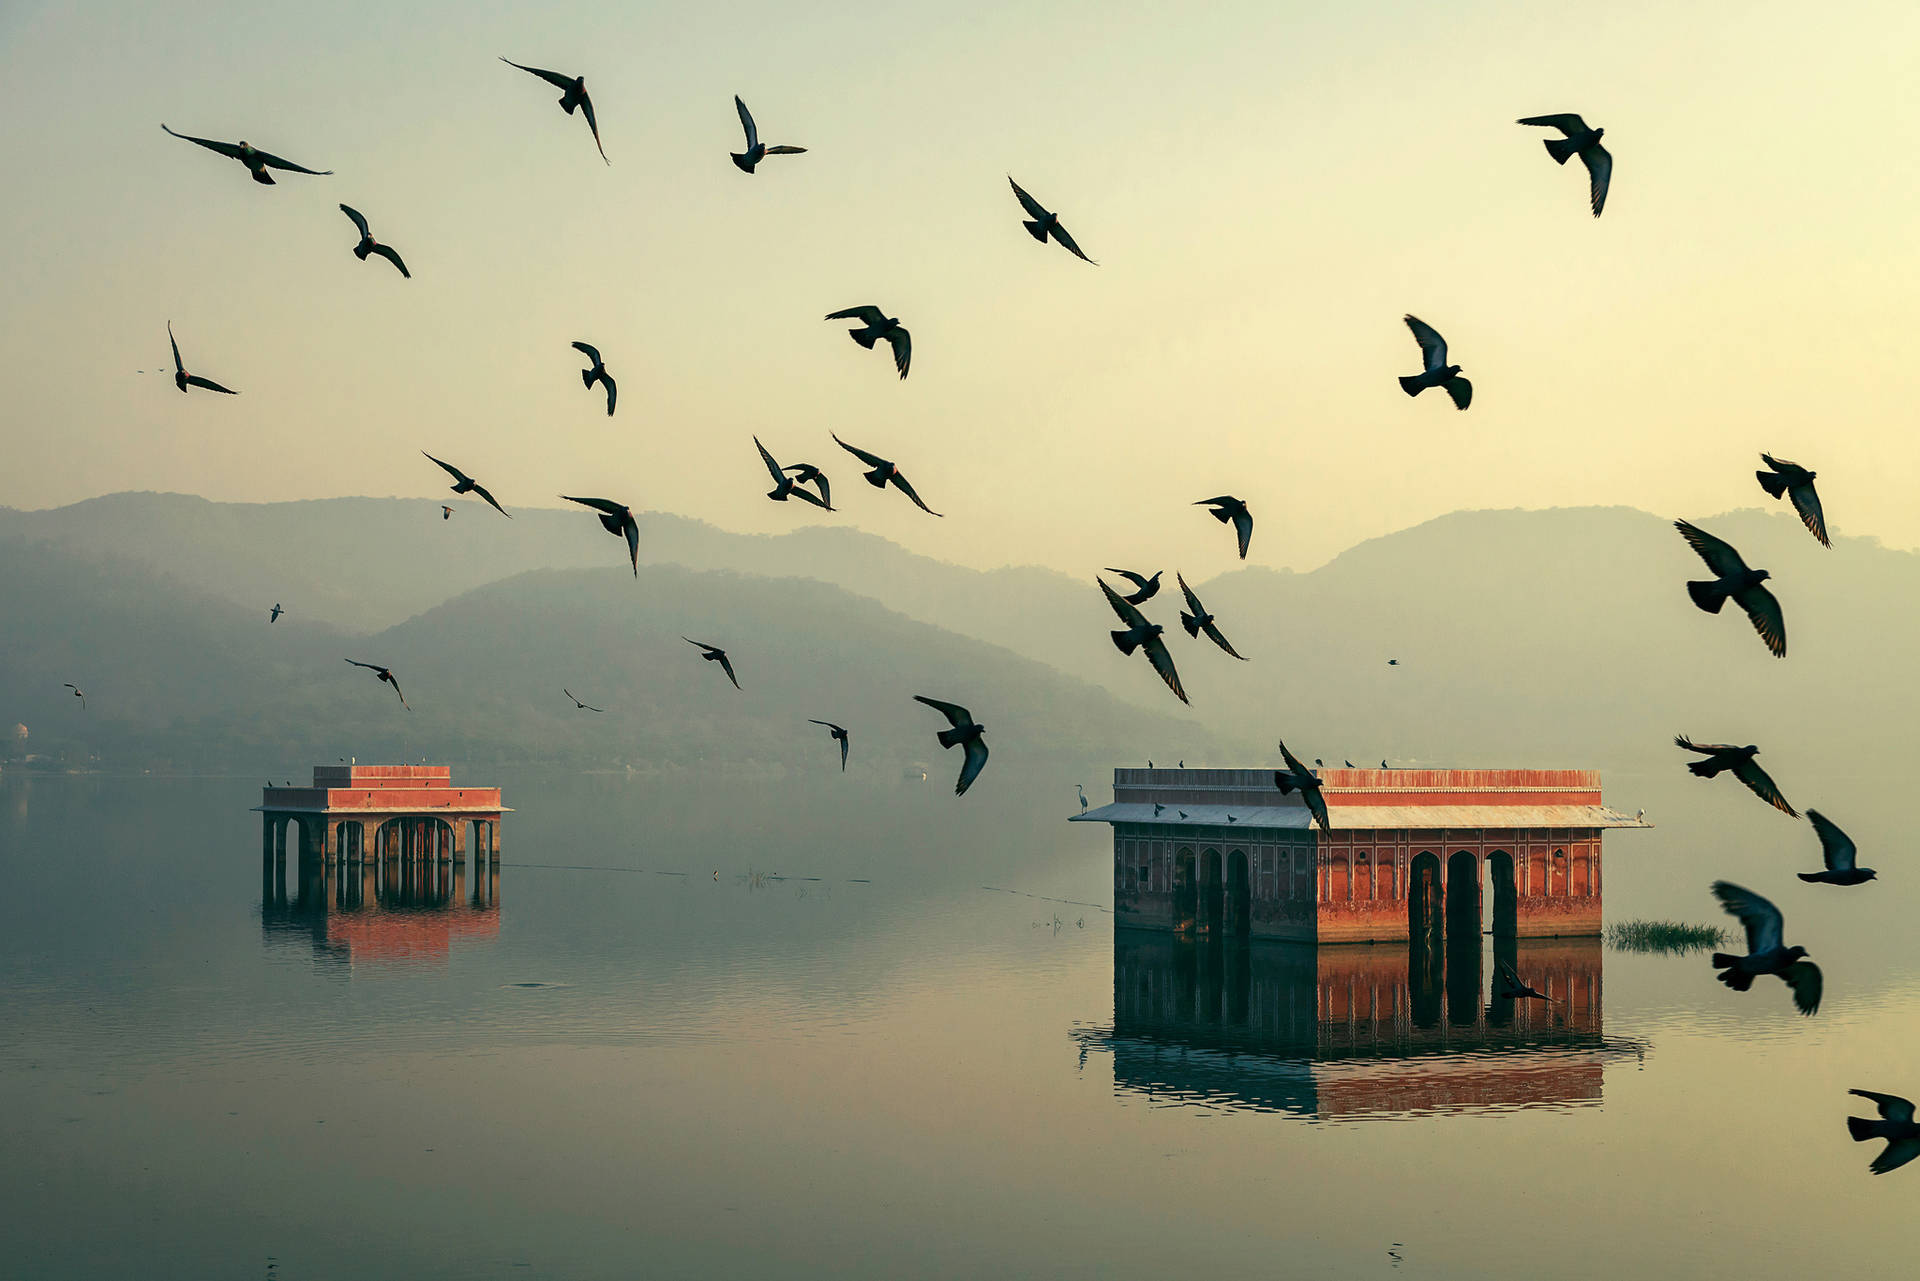 Jal Mahal Jaipur Surrounded By Birds Wallpaper